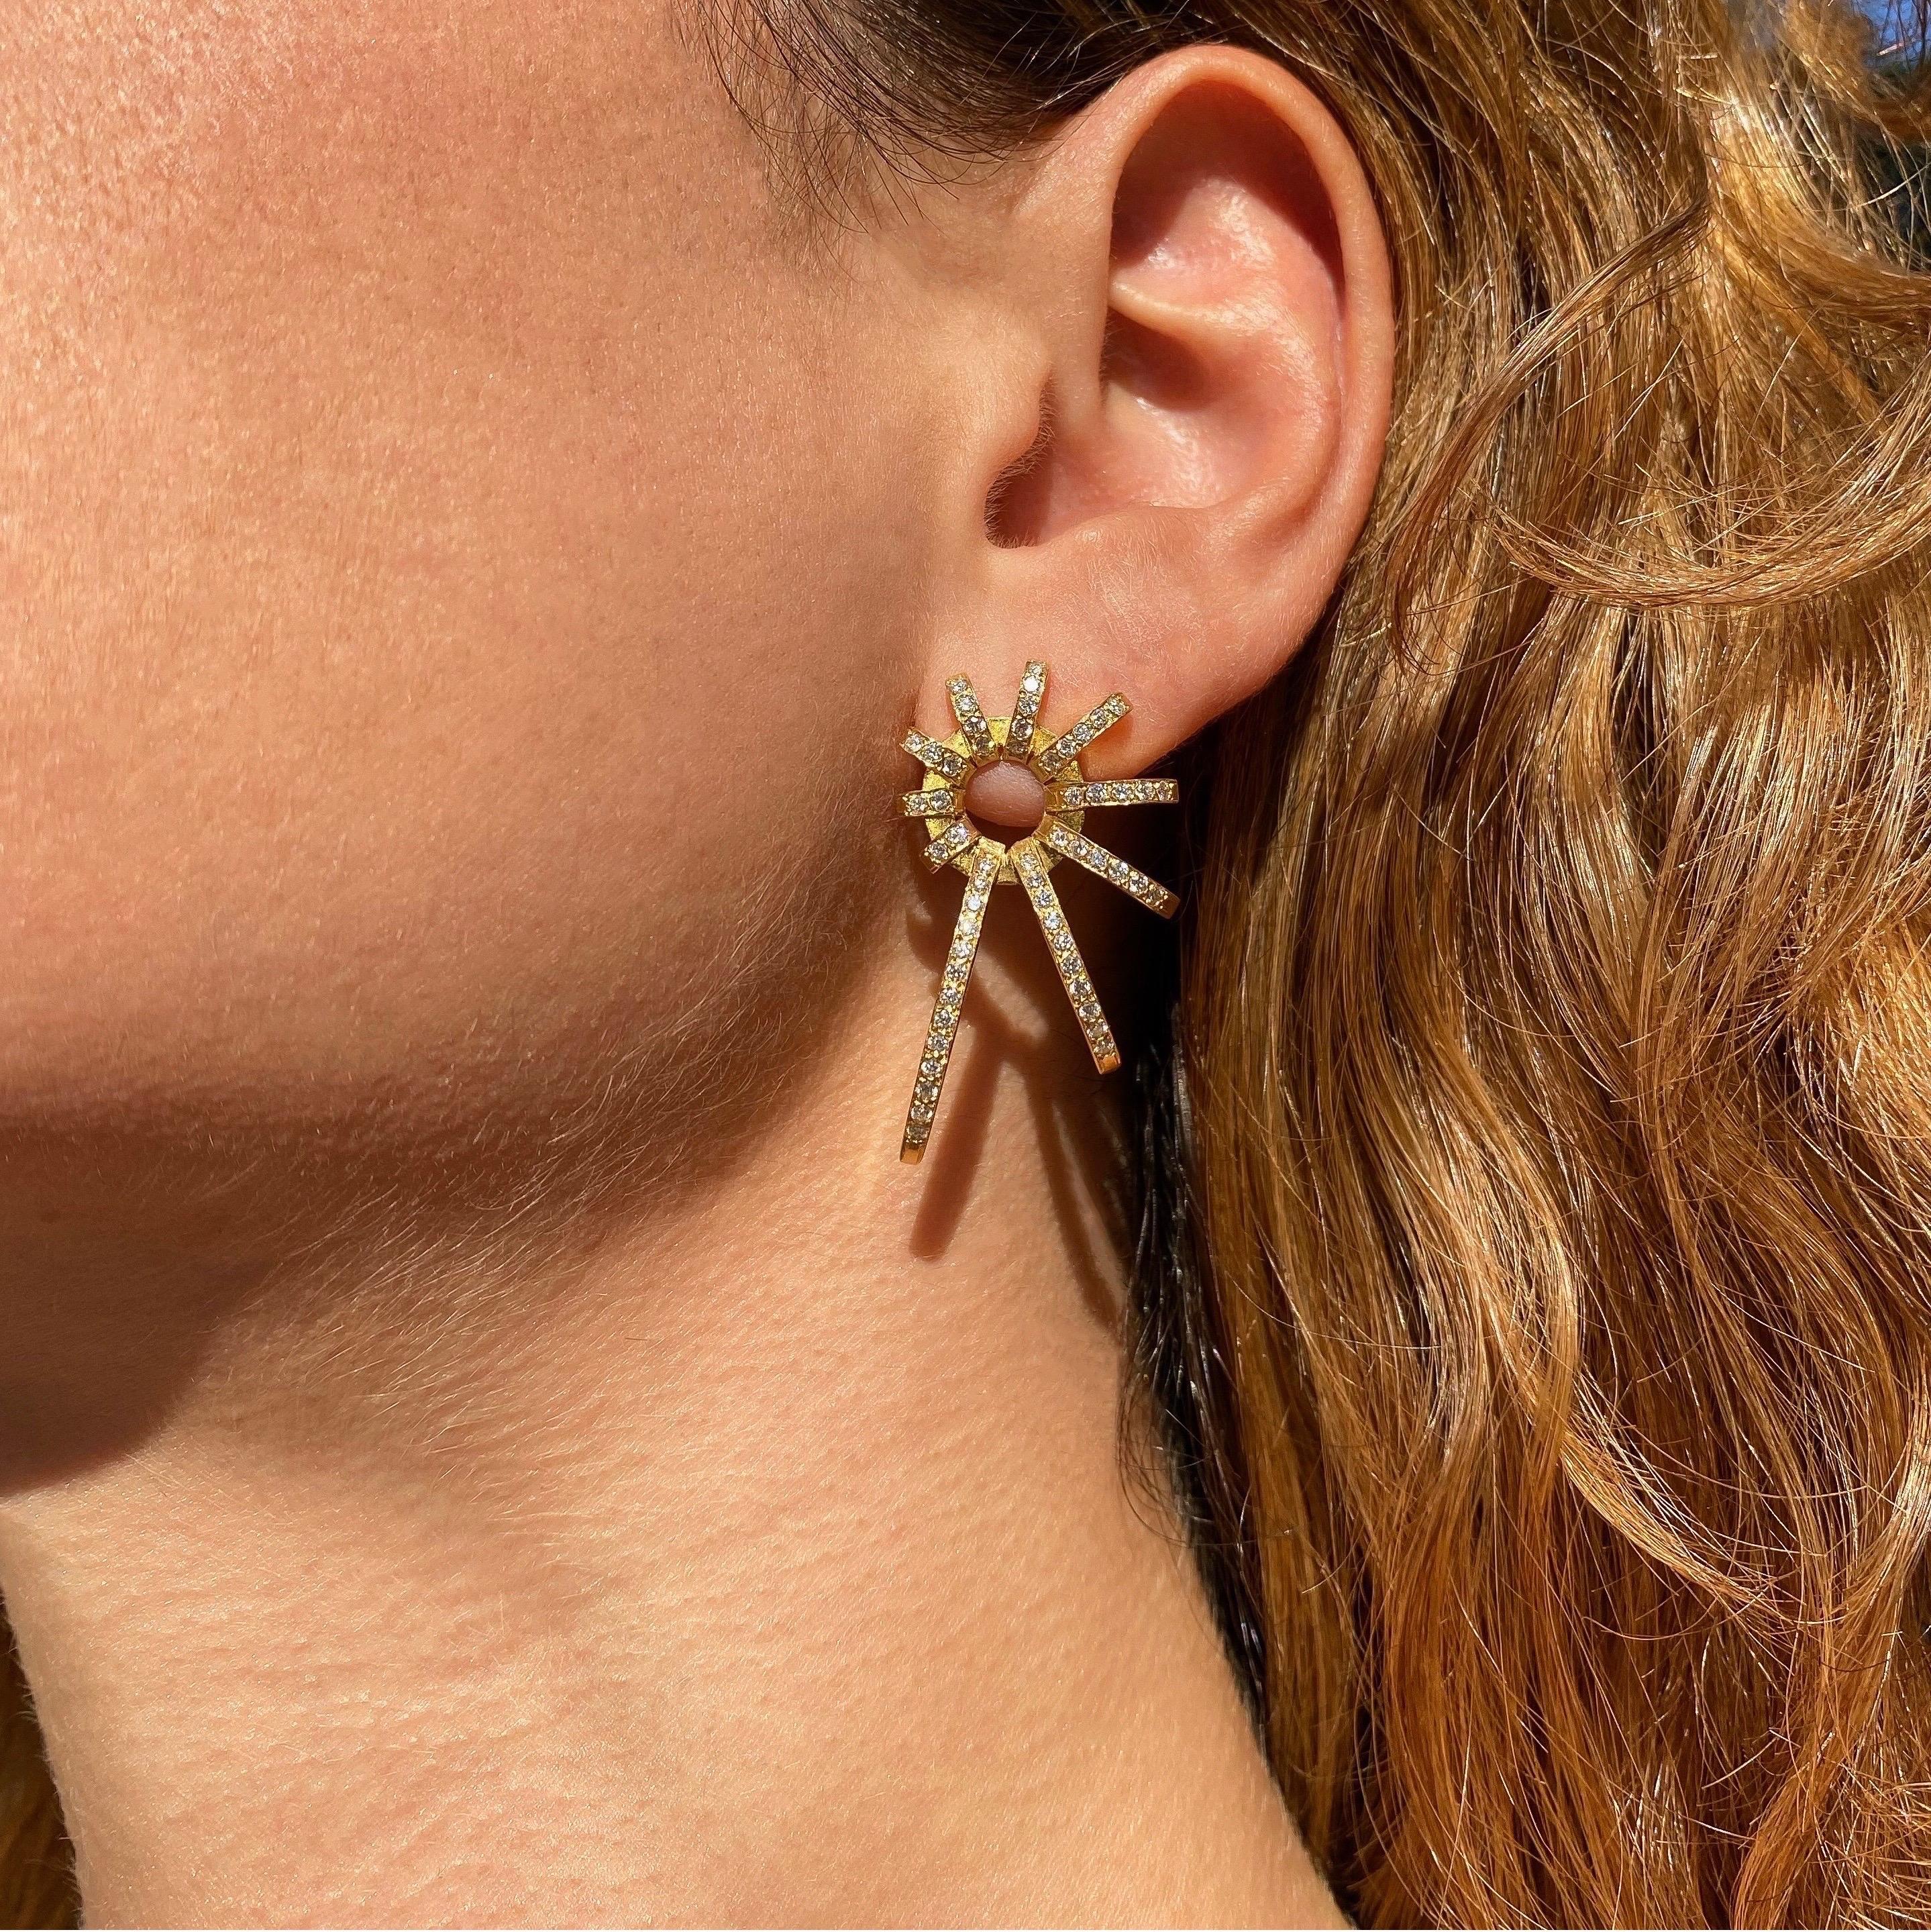 The 'Nautili’, earrings are crafted in 18k gold, hallmarked in Cyprus. This stunning pair of stud earrings, comes in a highly polished finish and features white, VS Diamonds, totalling 1,10 Cts. The 'Nautili’ earrings are part of Maria Kotsonis’s